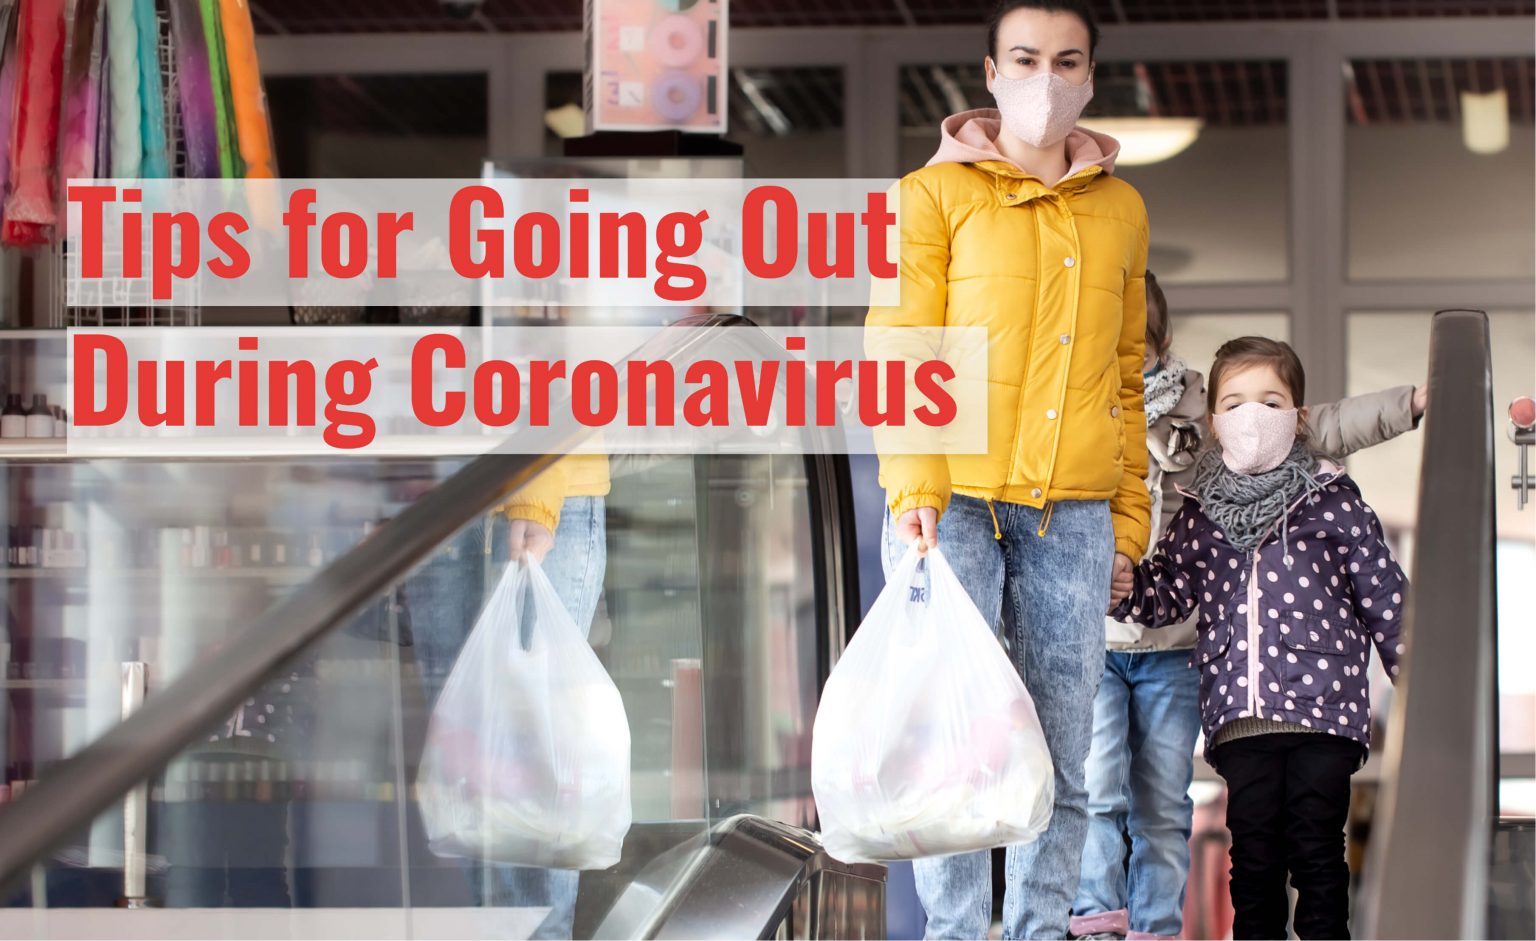 Tips for going out during coronavirus